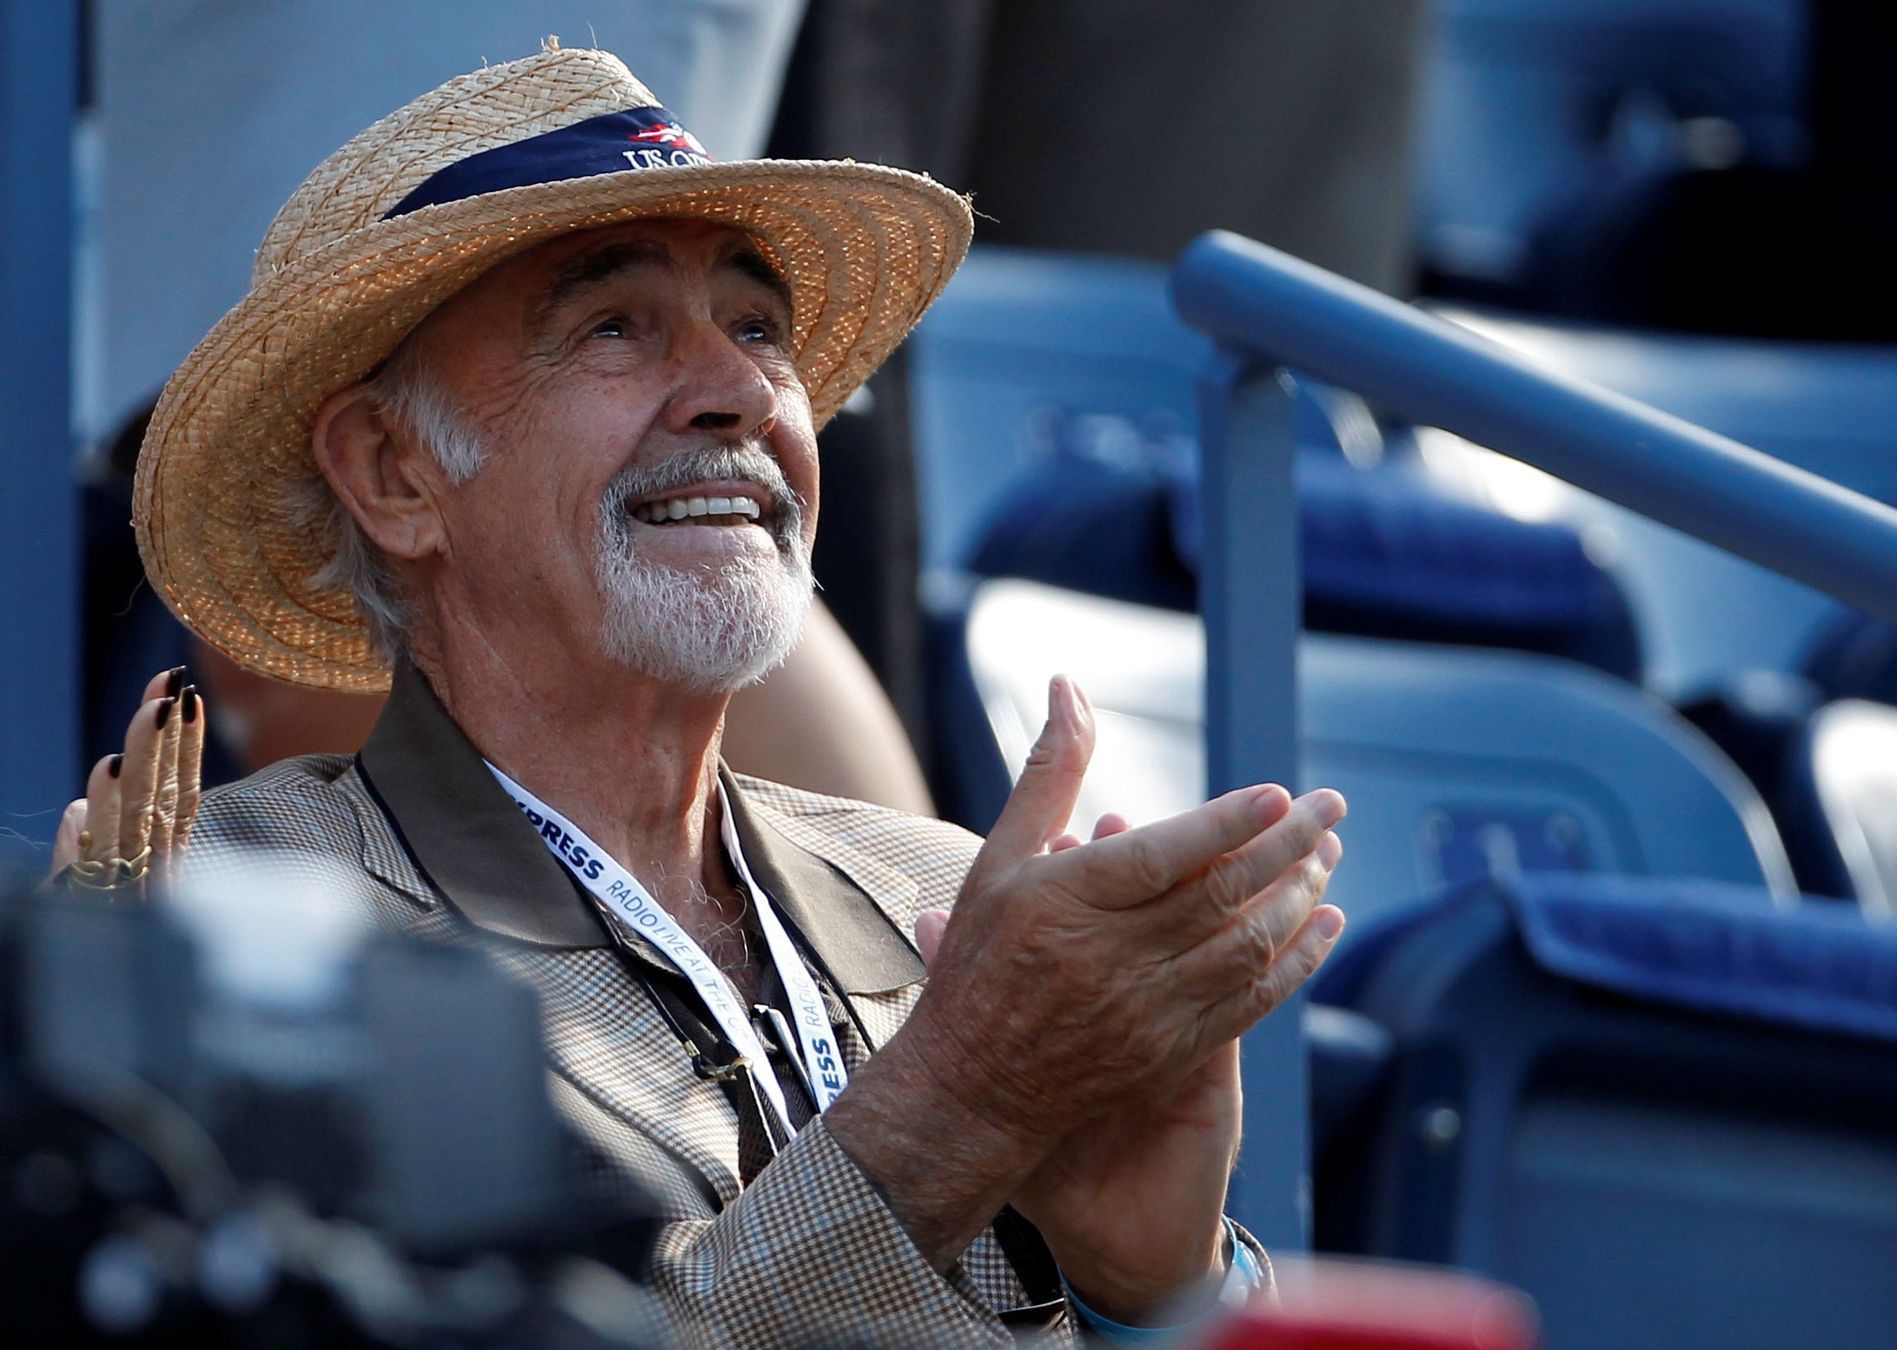 FILE PHOTO: Actor Connery awaits the start of the U.S. Open men's final match between Serbia's Djokovic and Britain's Murray in New York